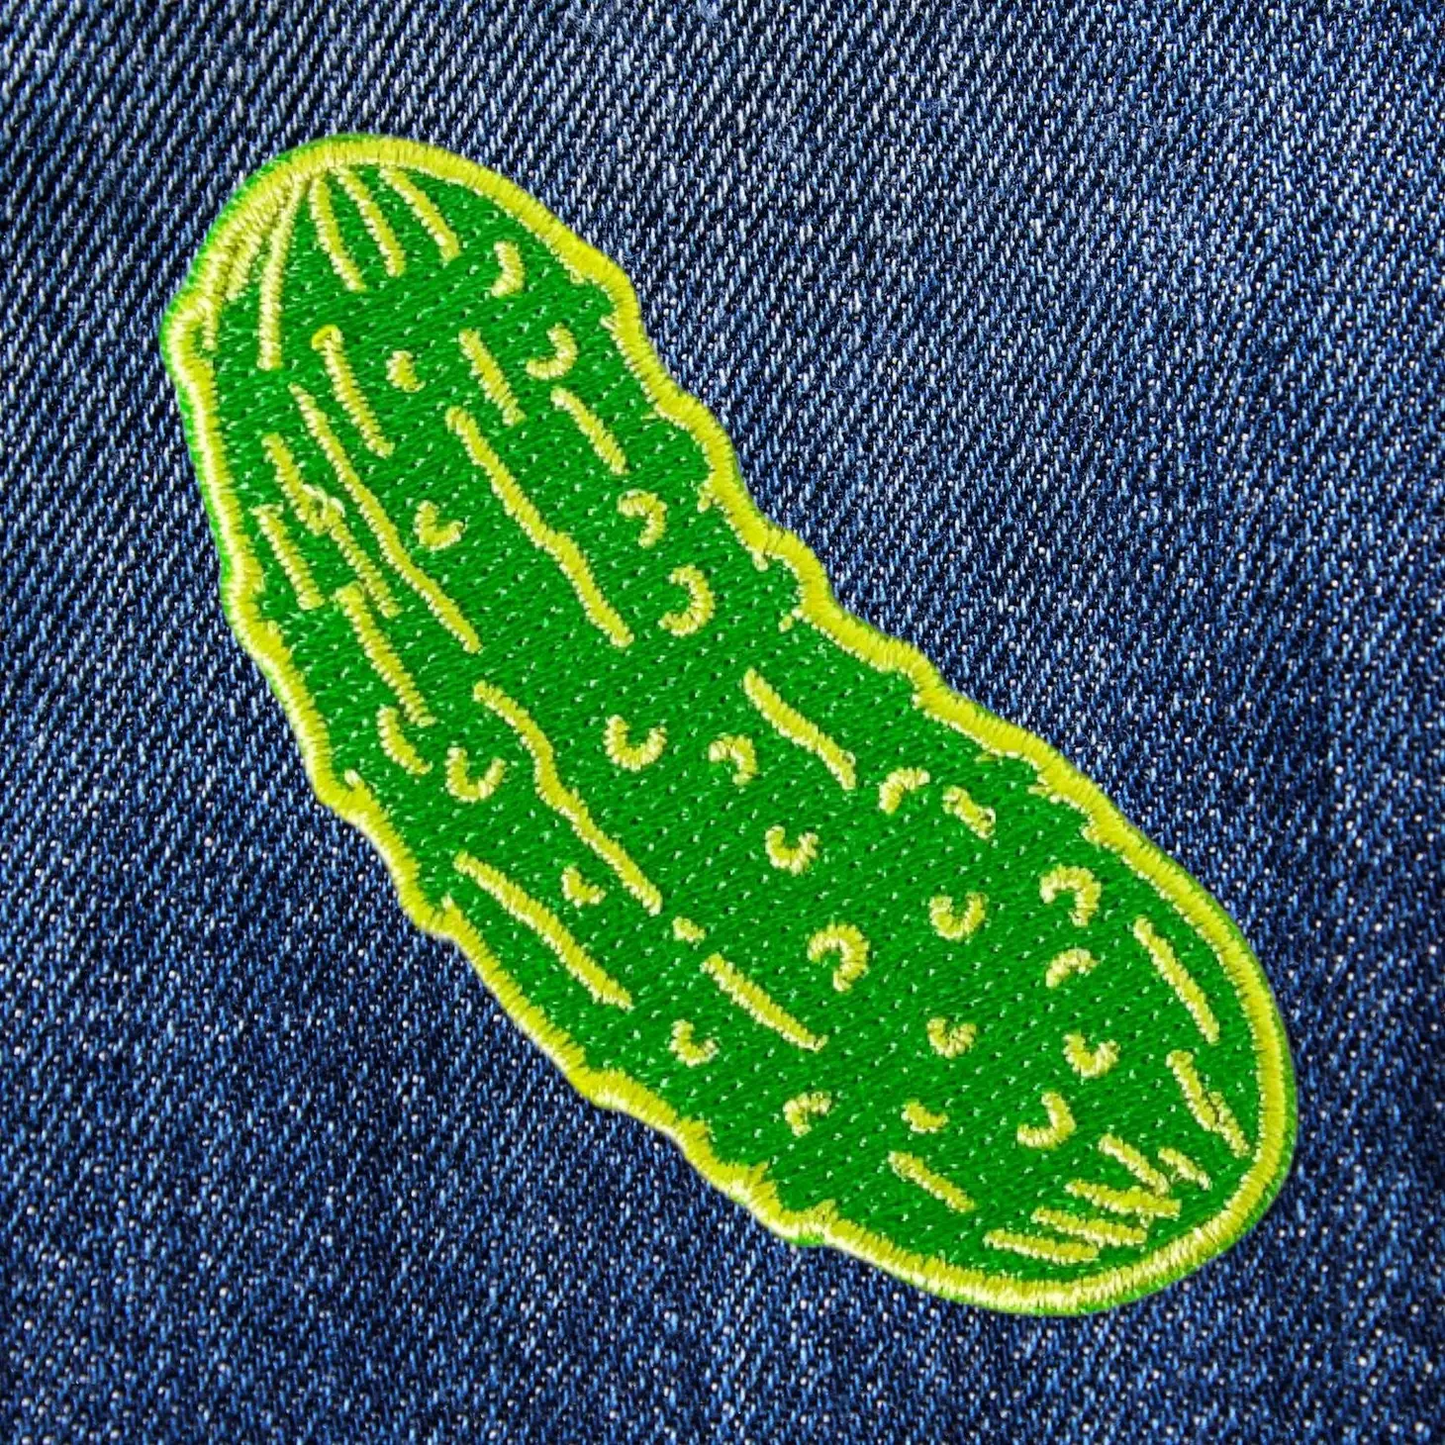 Pickle Iron-On Patch